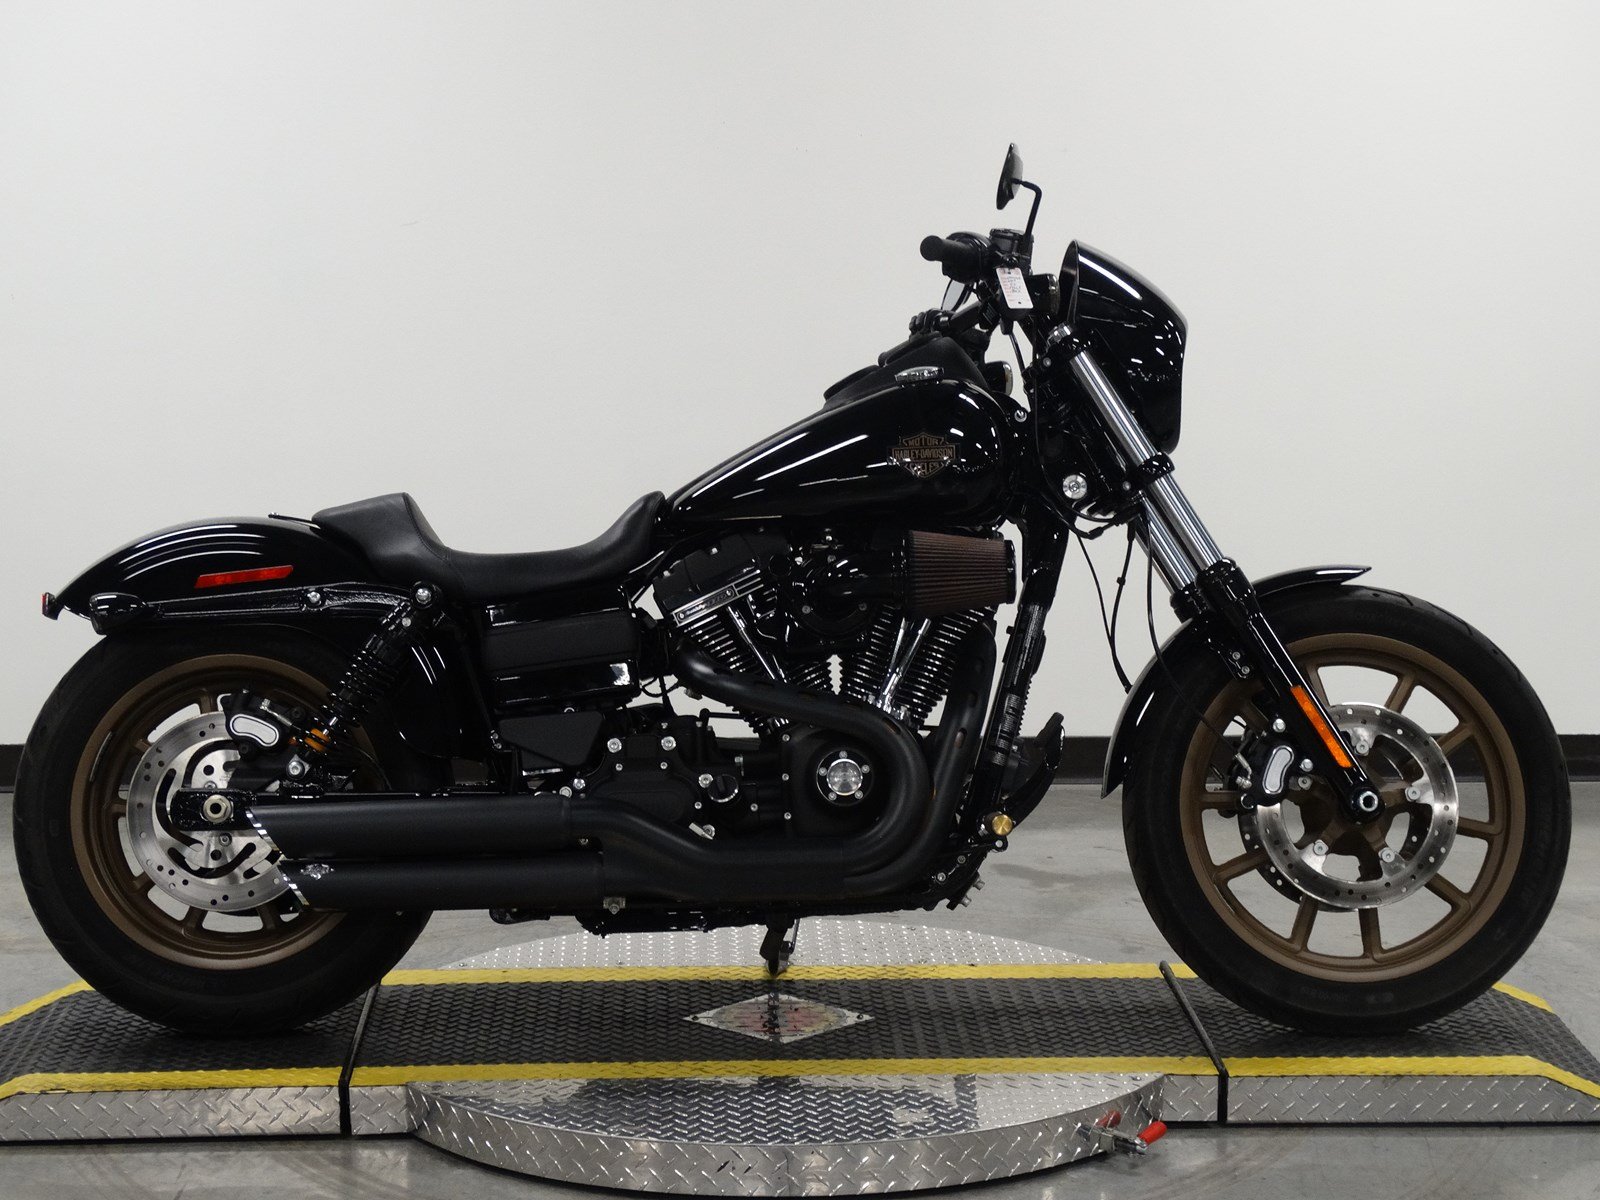 Pre-Owned 2017 Harley-Davidson Dyna Low Rider S FXDLS Dyna in Olathe # ...